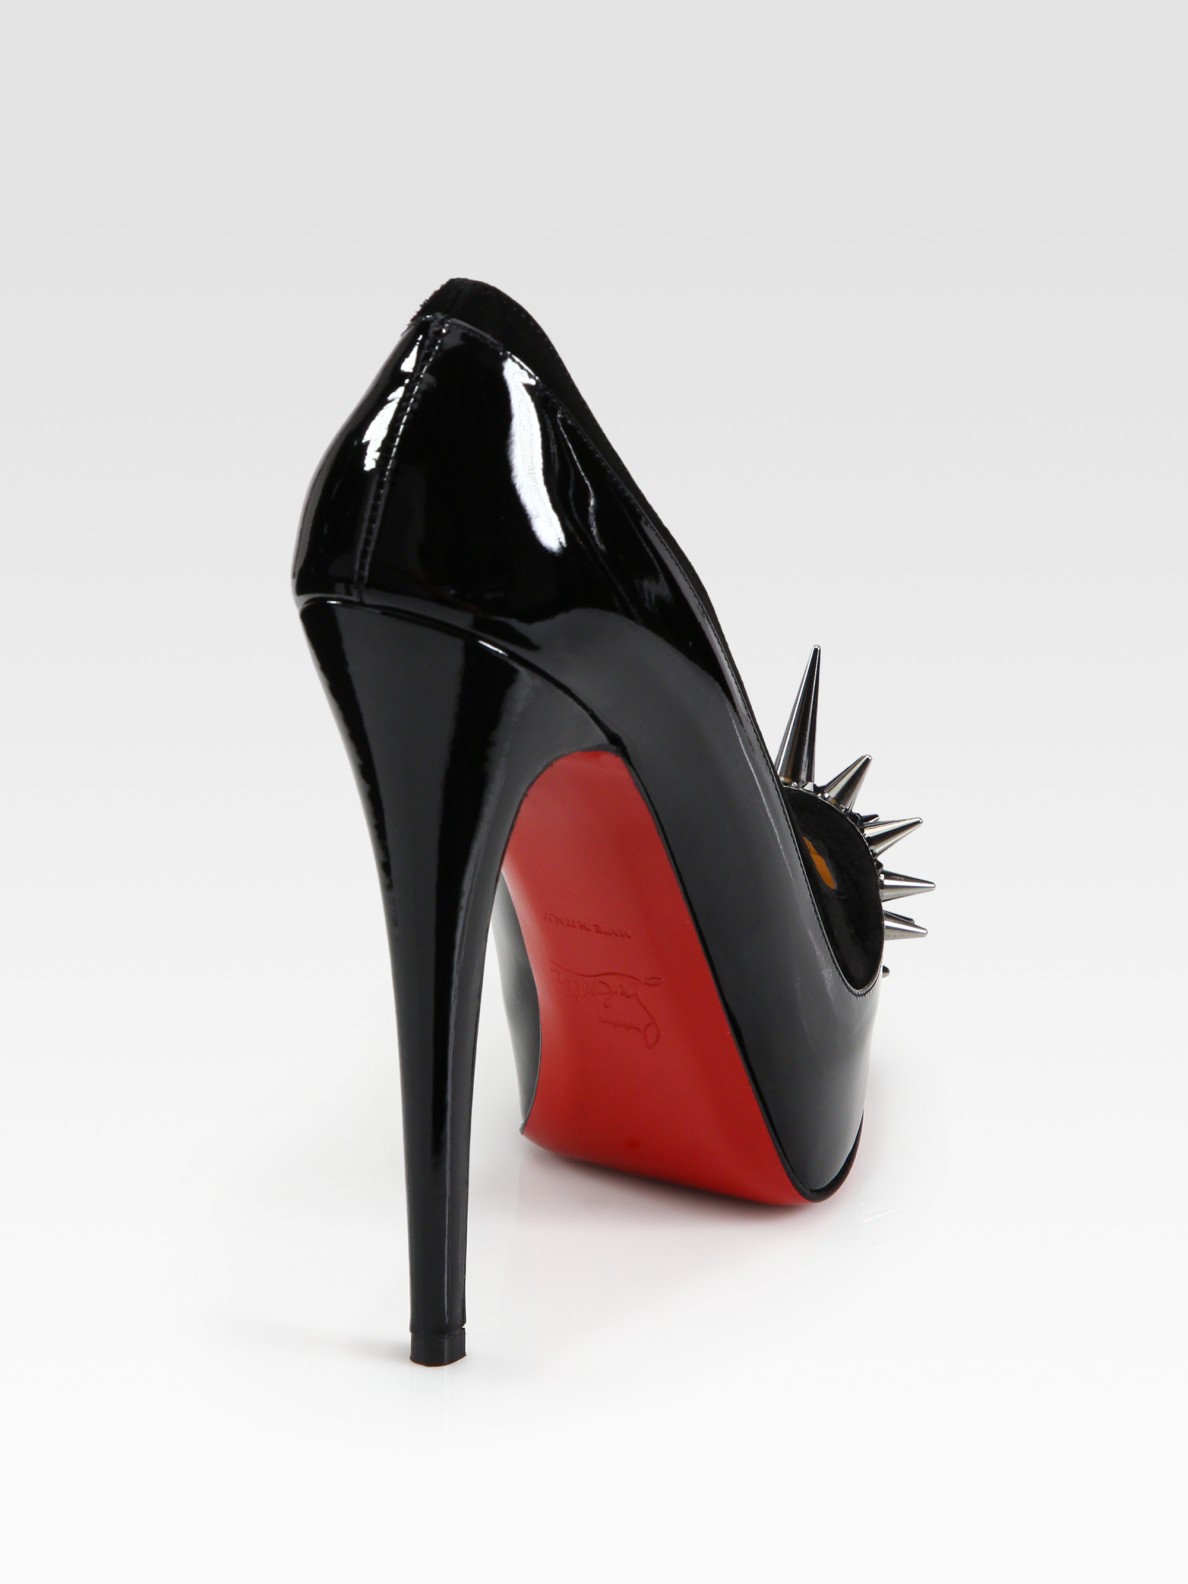 Christian Louboutin Asteroid Suede and Leather Spike Pumps in Black | Lyst